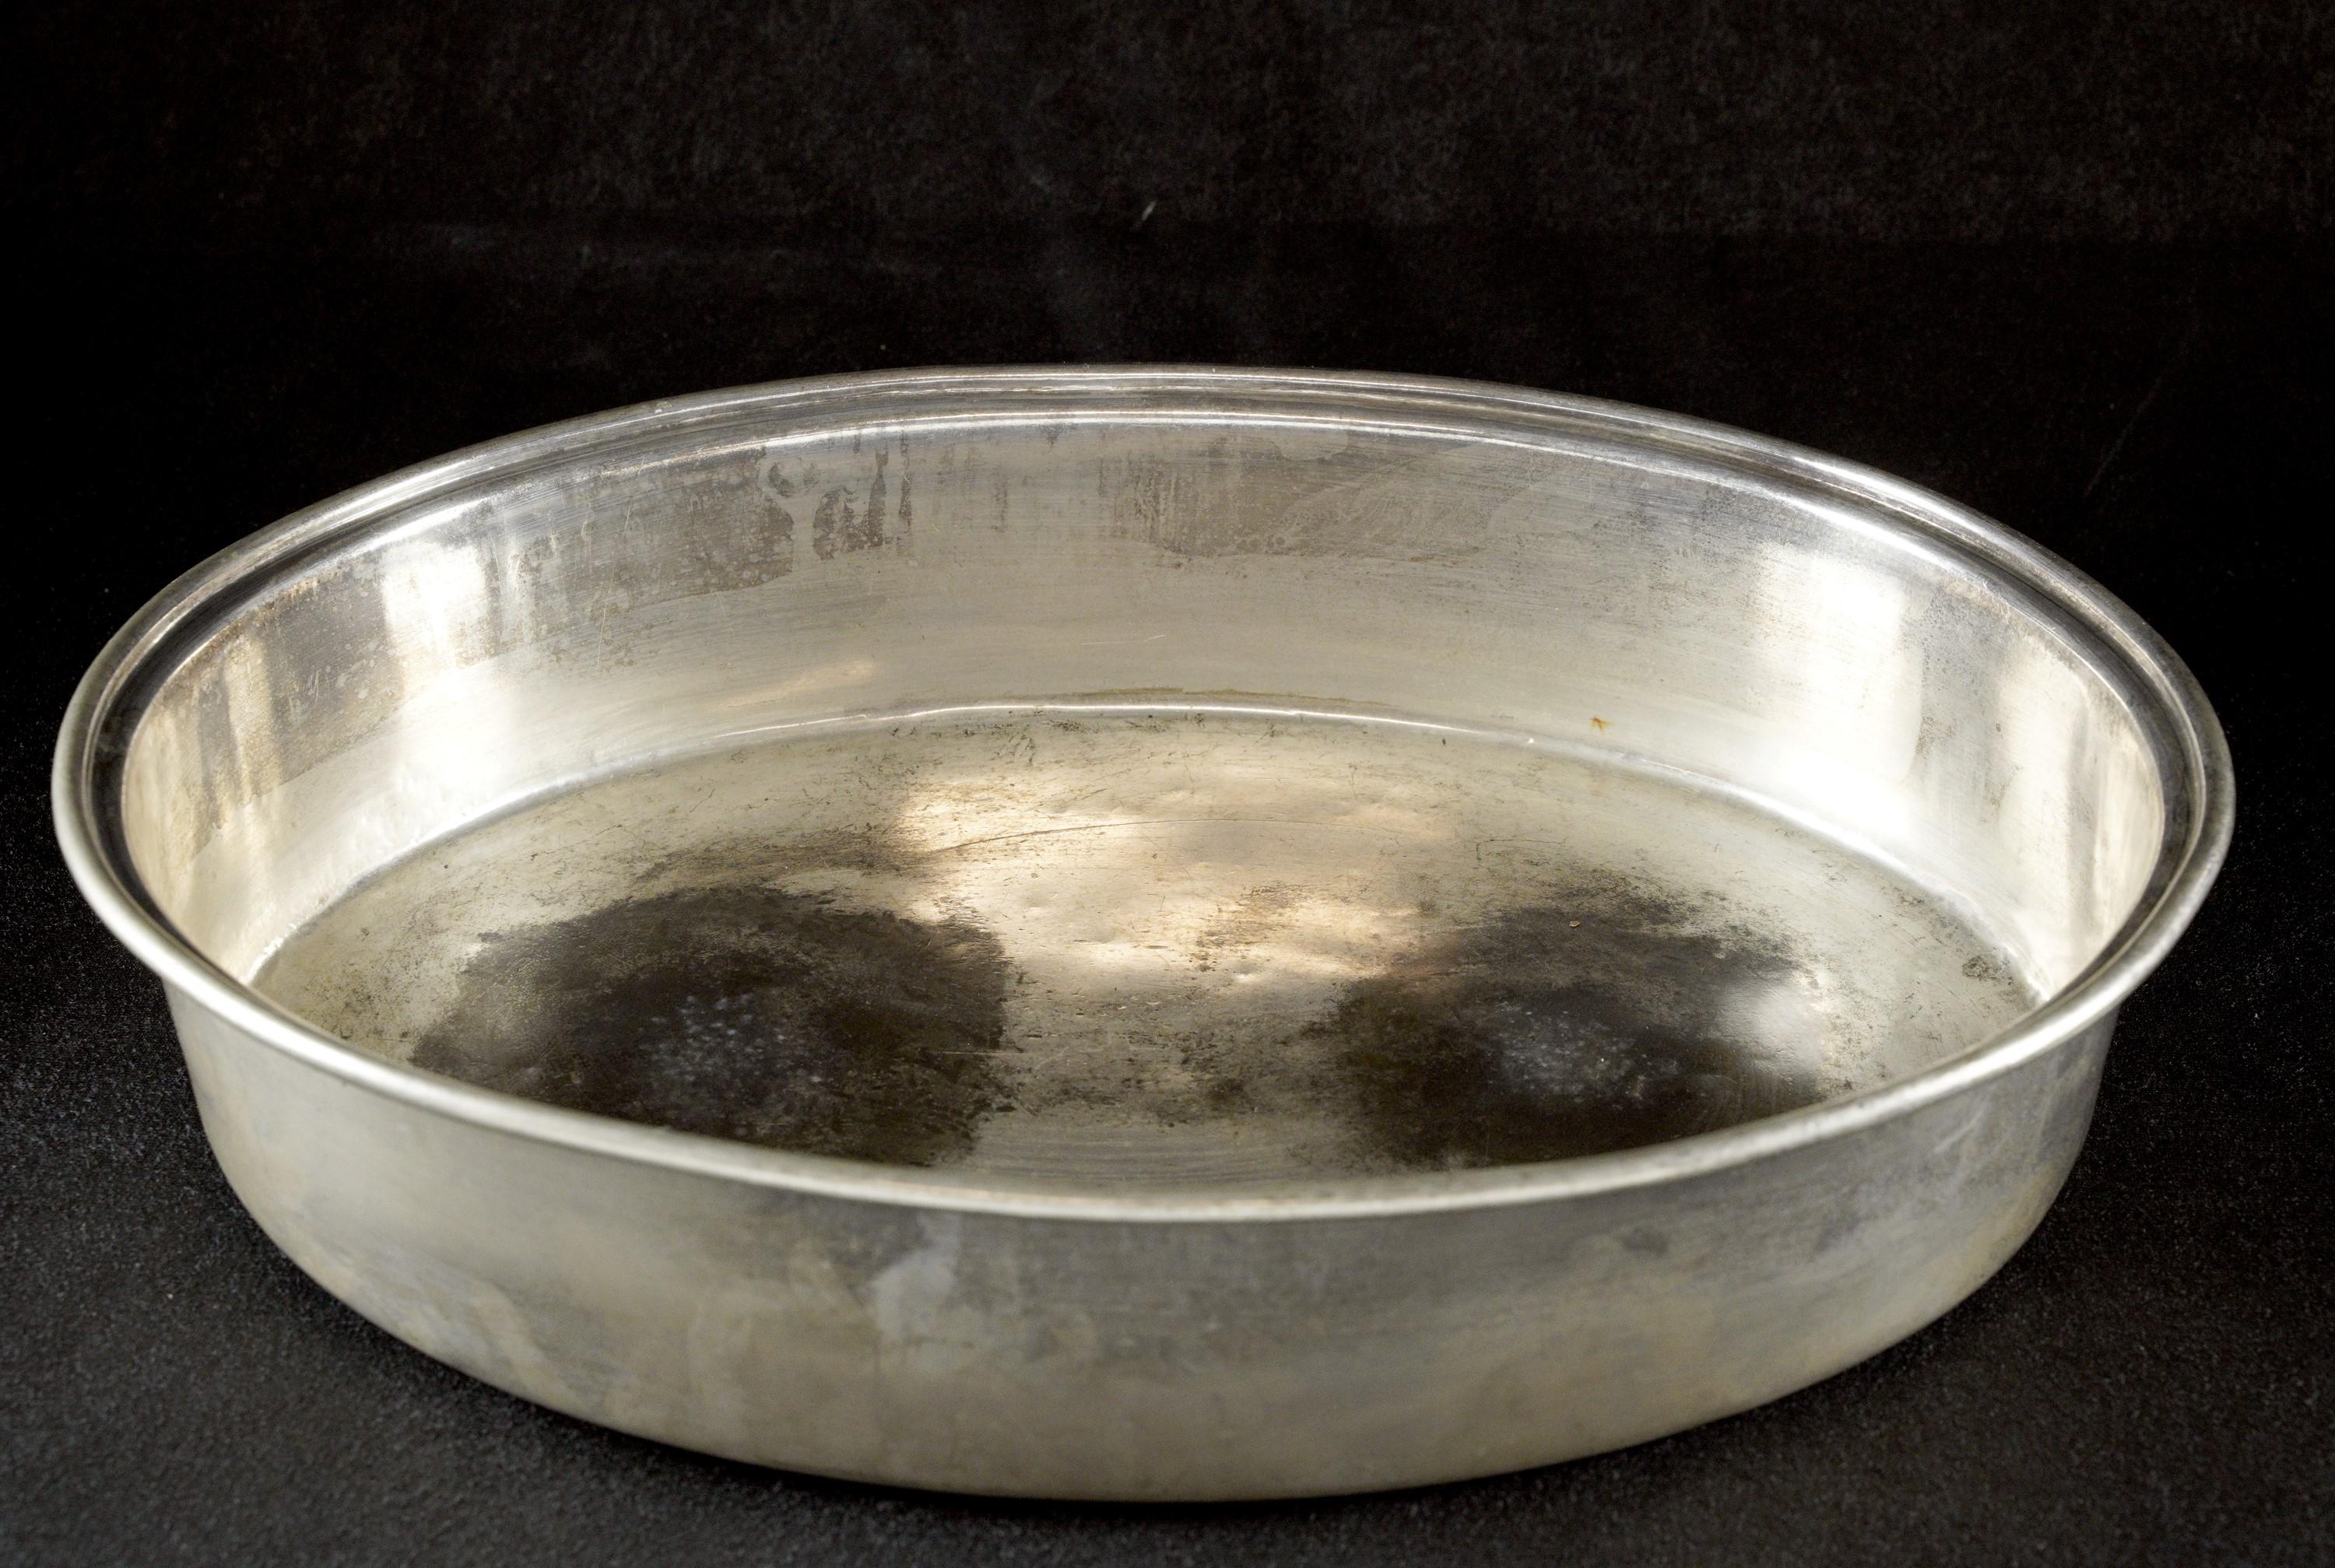 Well used silver plated brass buffet bowl rescued from the one and only Waldorf Astoria Hotel on Park Ave in New York City. This oval heavy gage has a few minor dents on the base and rim from much use and age, along with heat stains from heat from